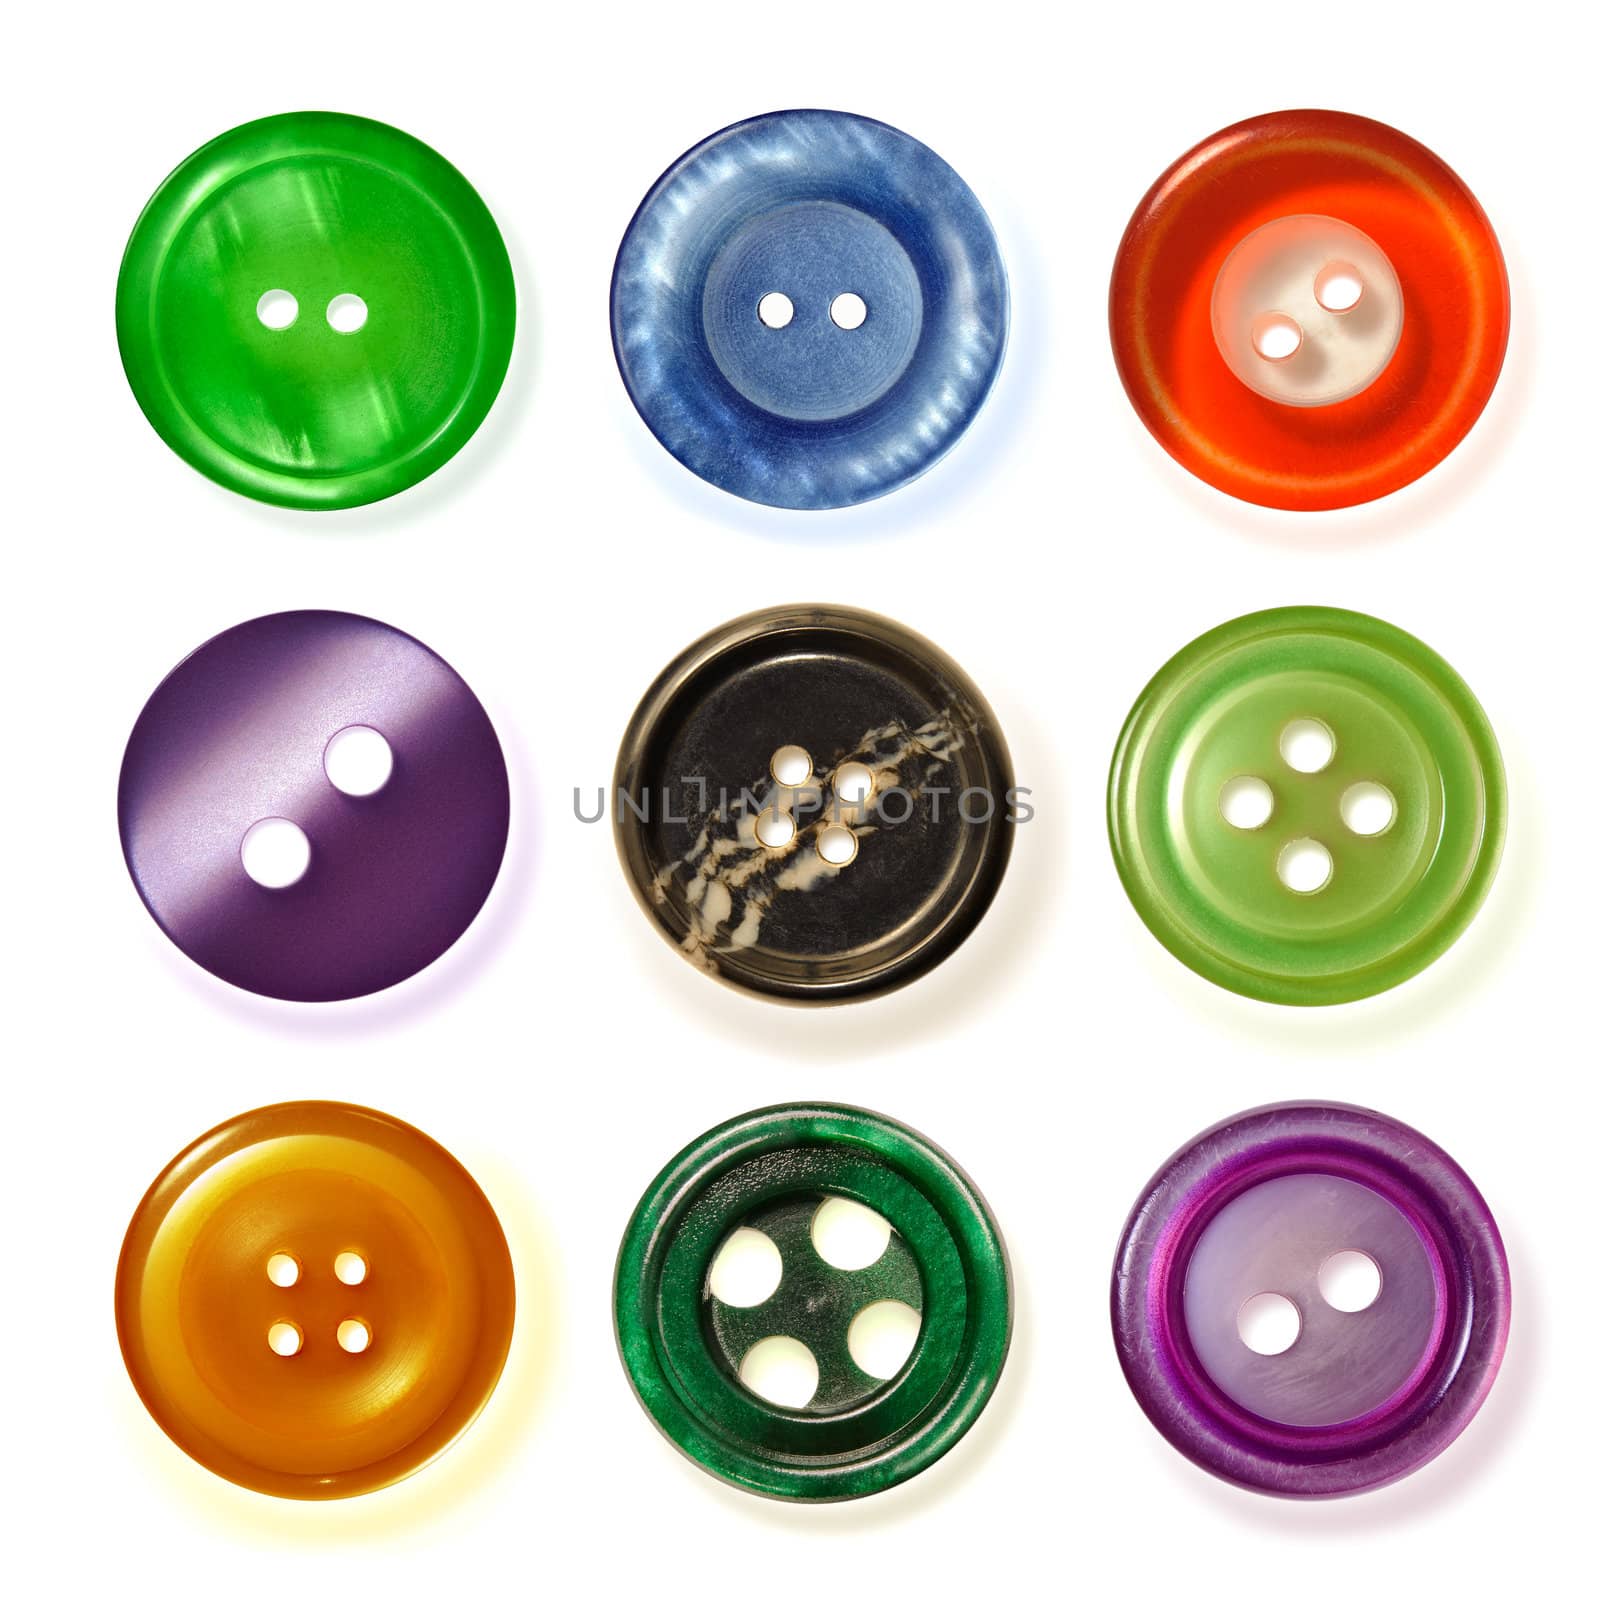 Nine sewing buttons. by bashta